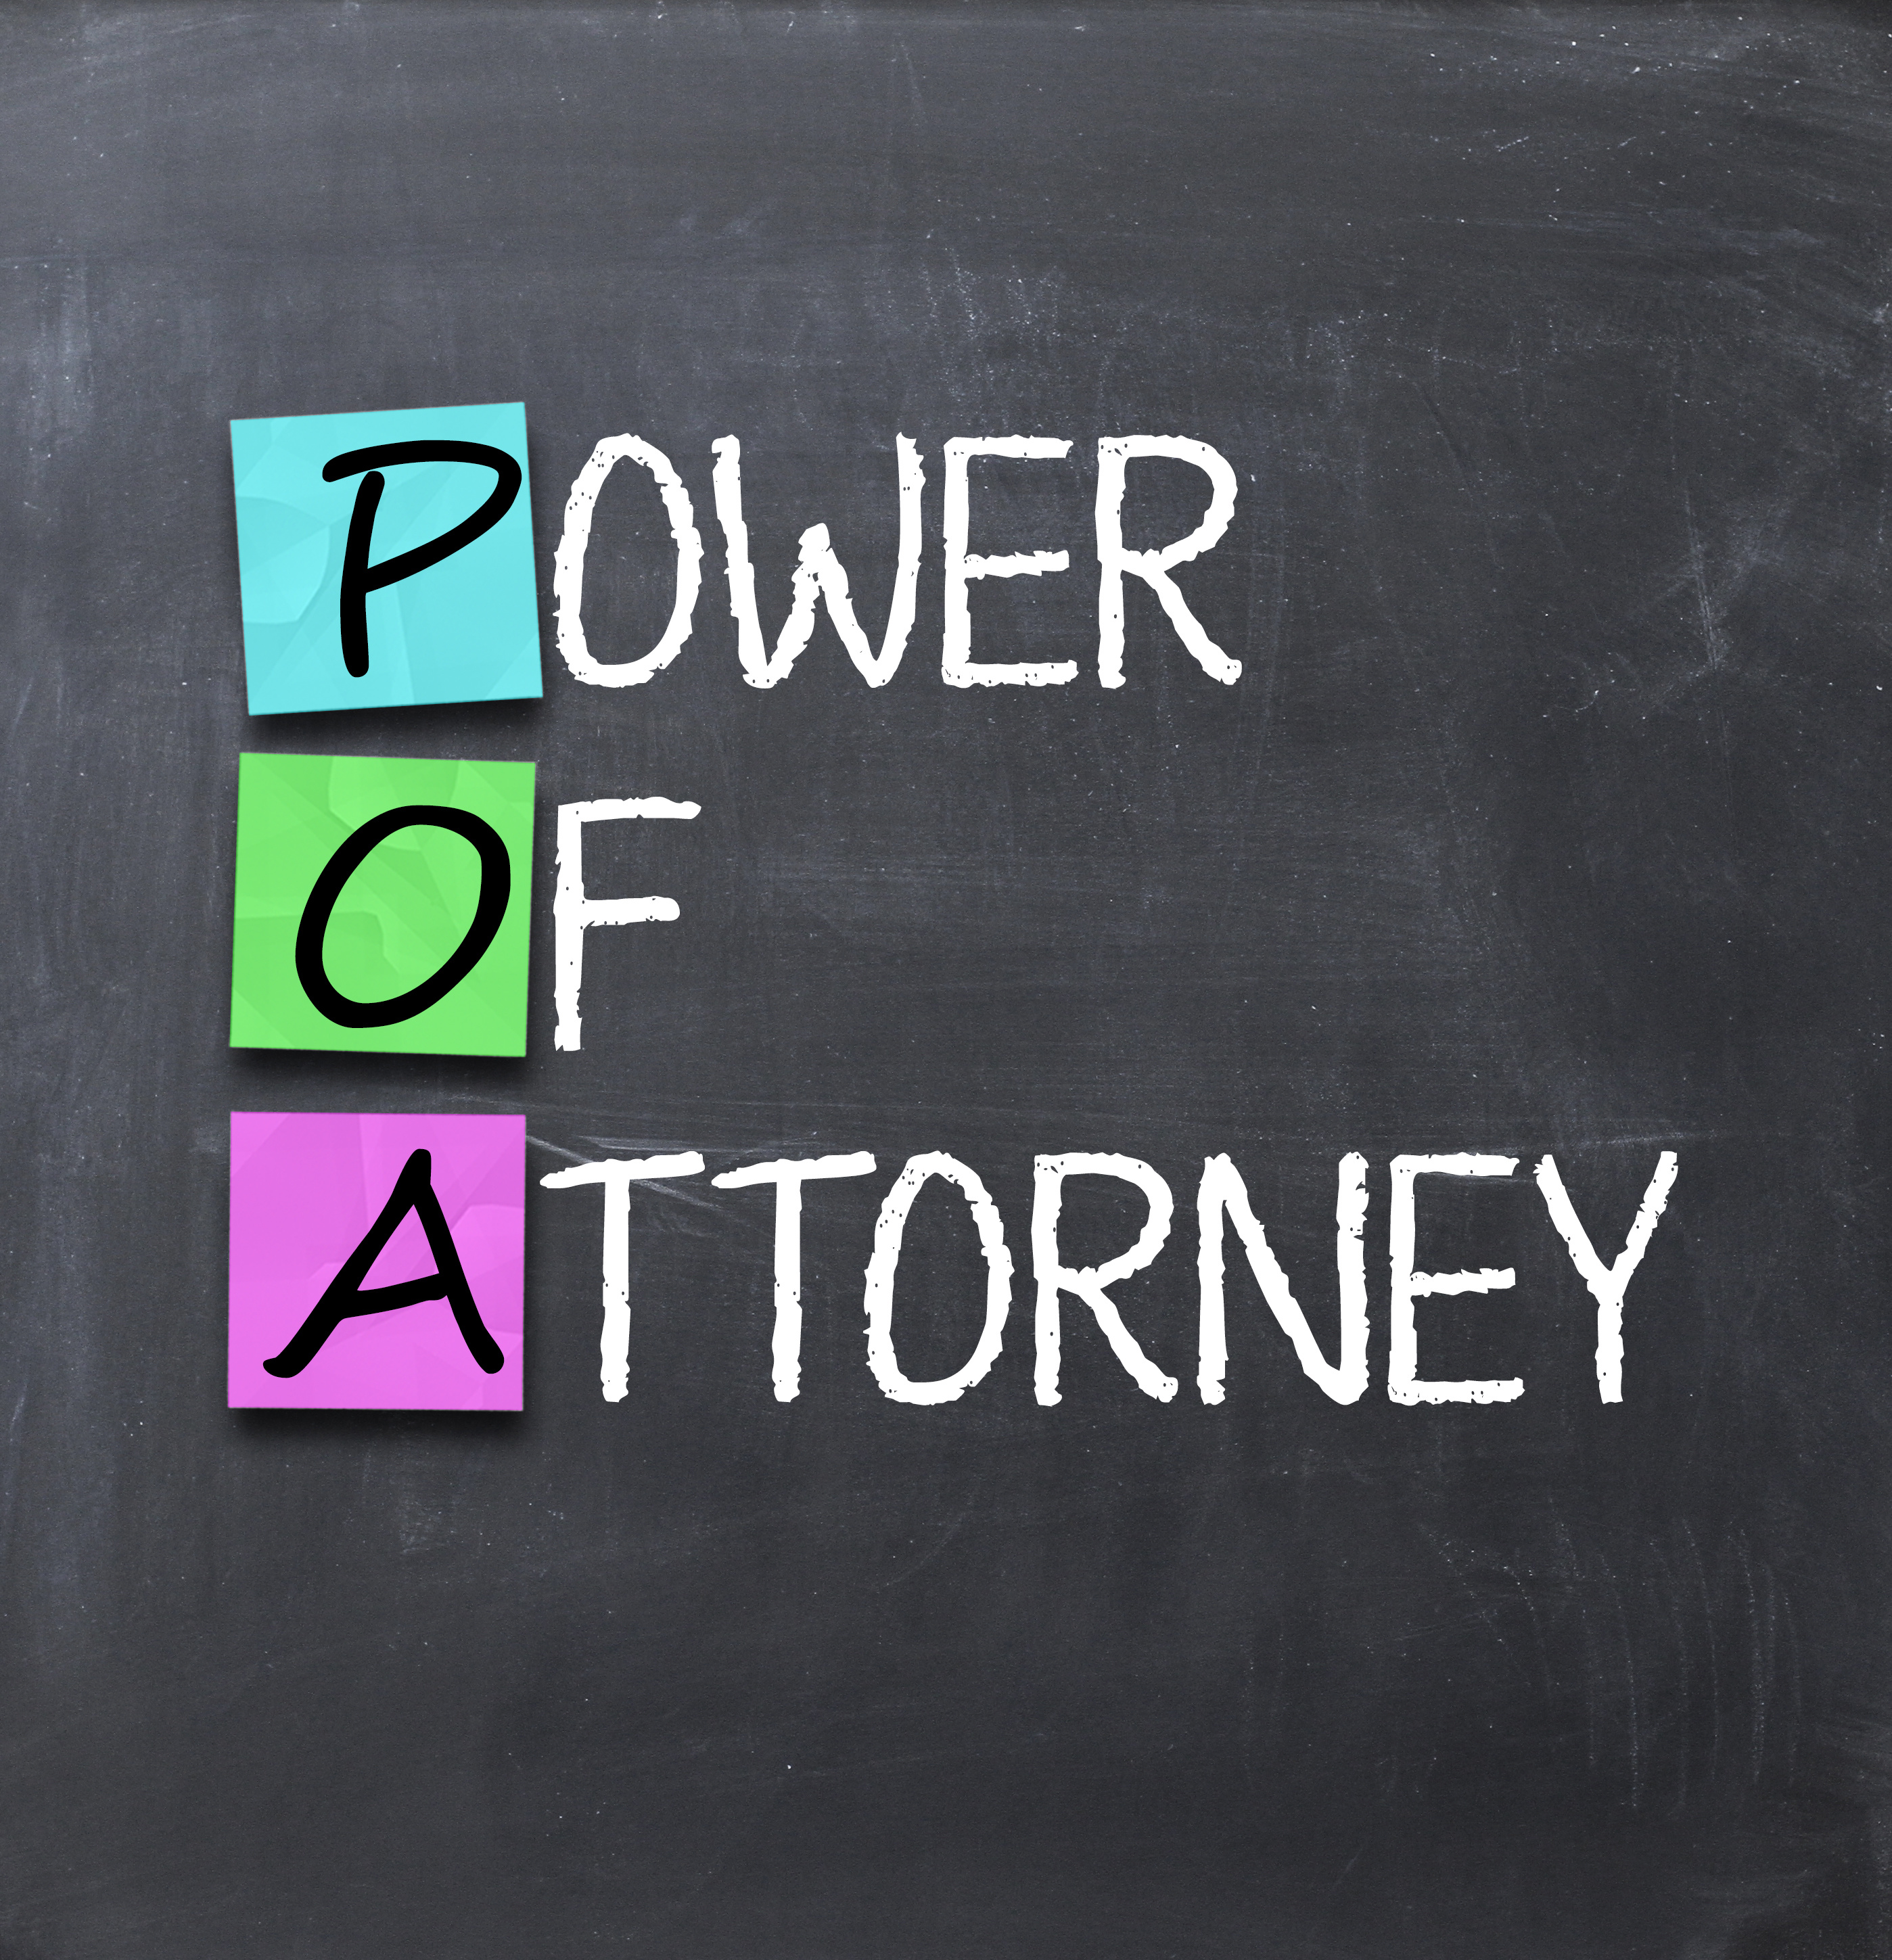 Can I Name More Than One Person as My Power of Attorney?